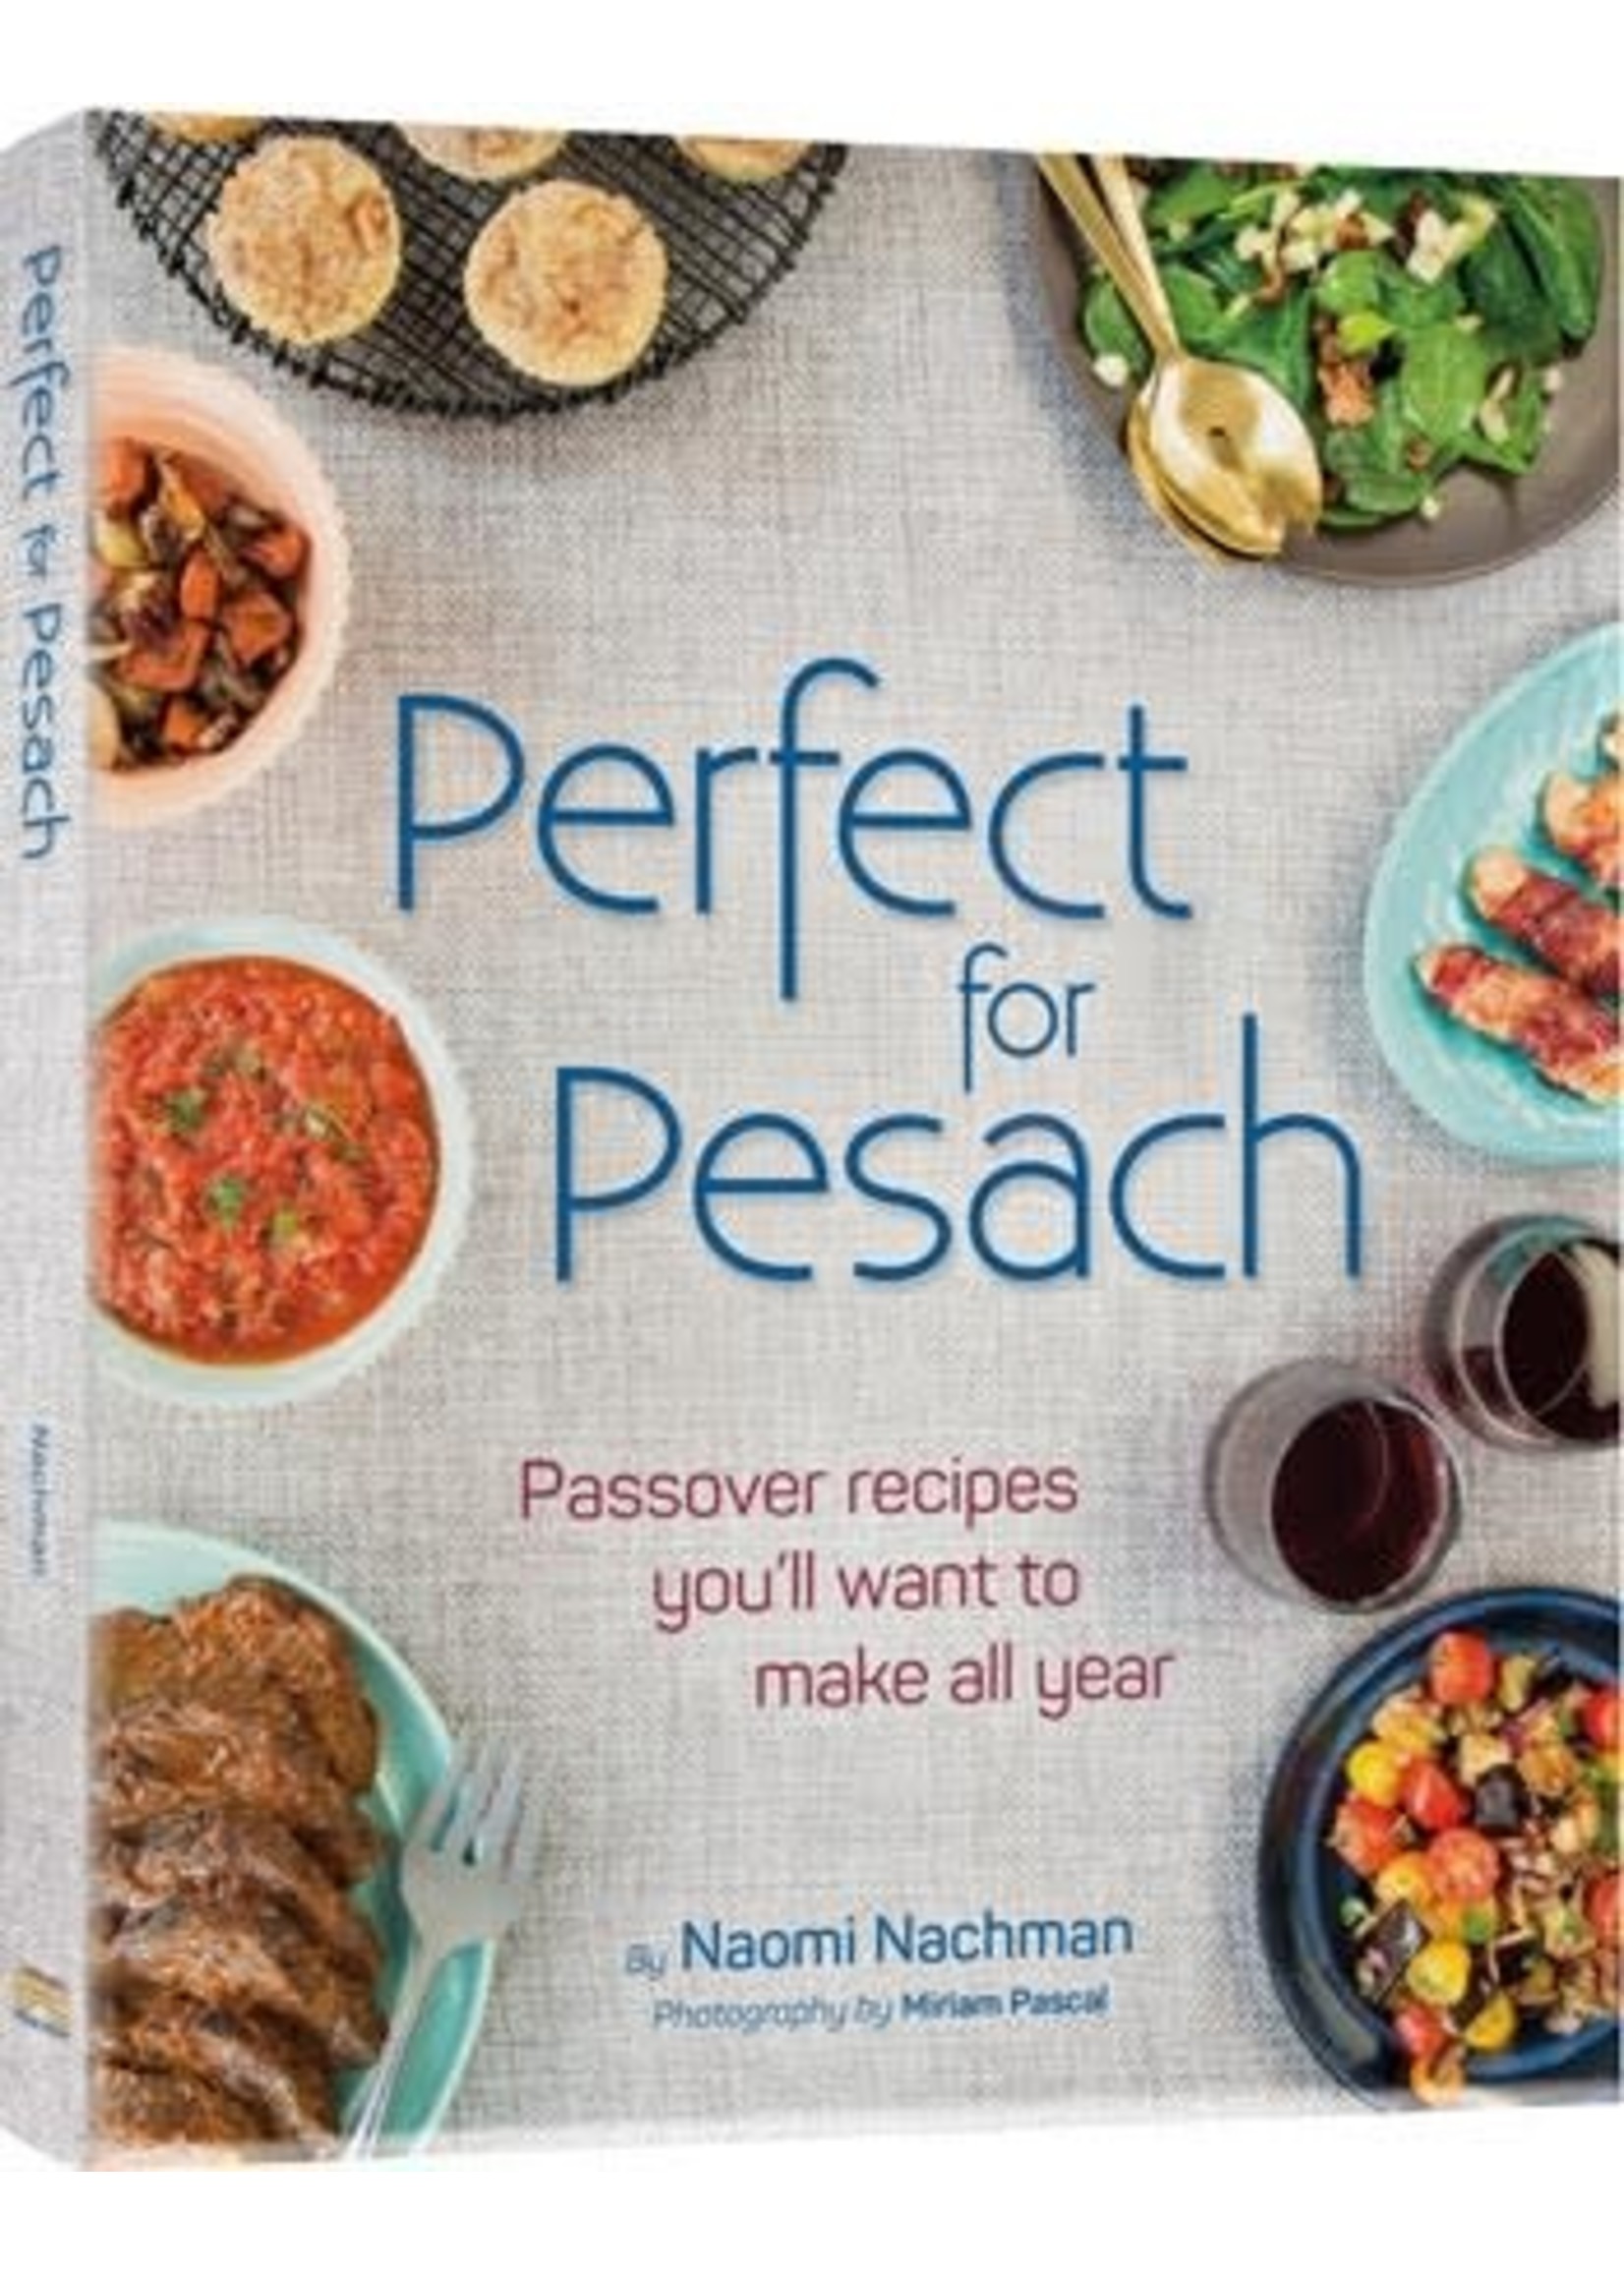 PERFECT FOR PESACH